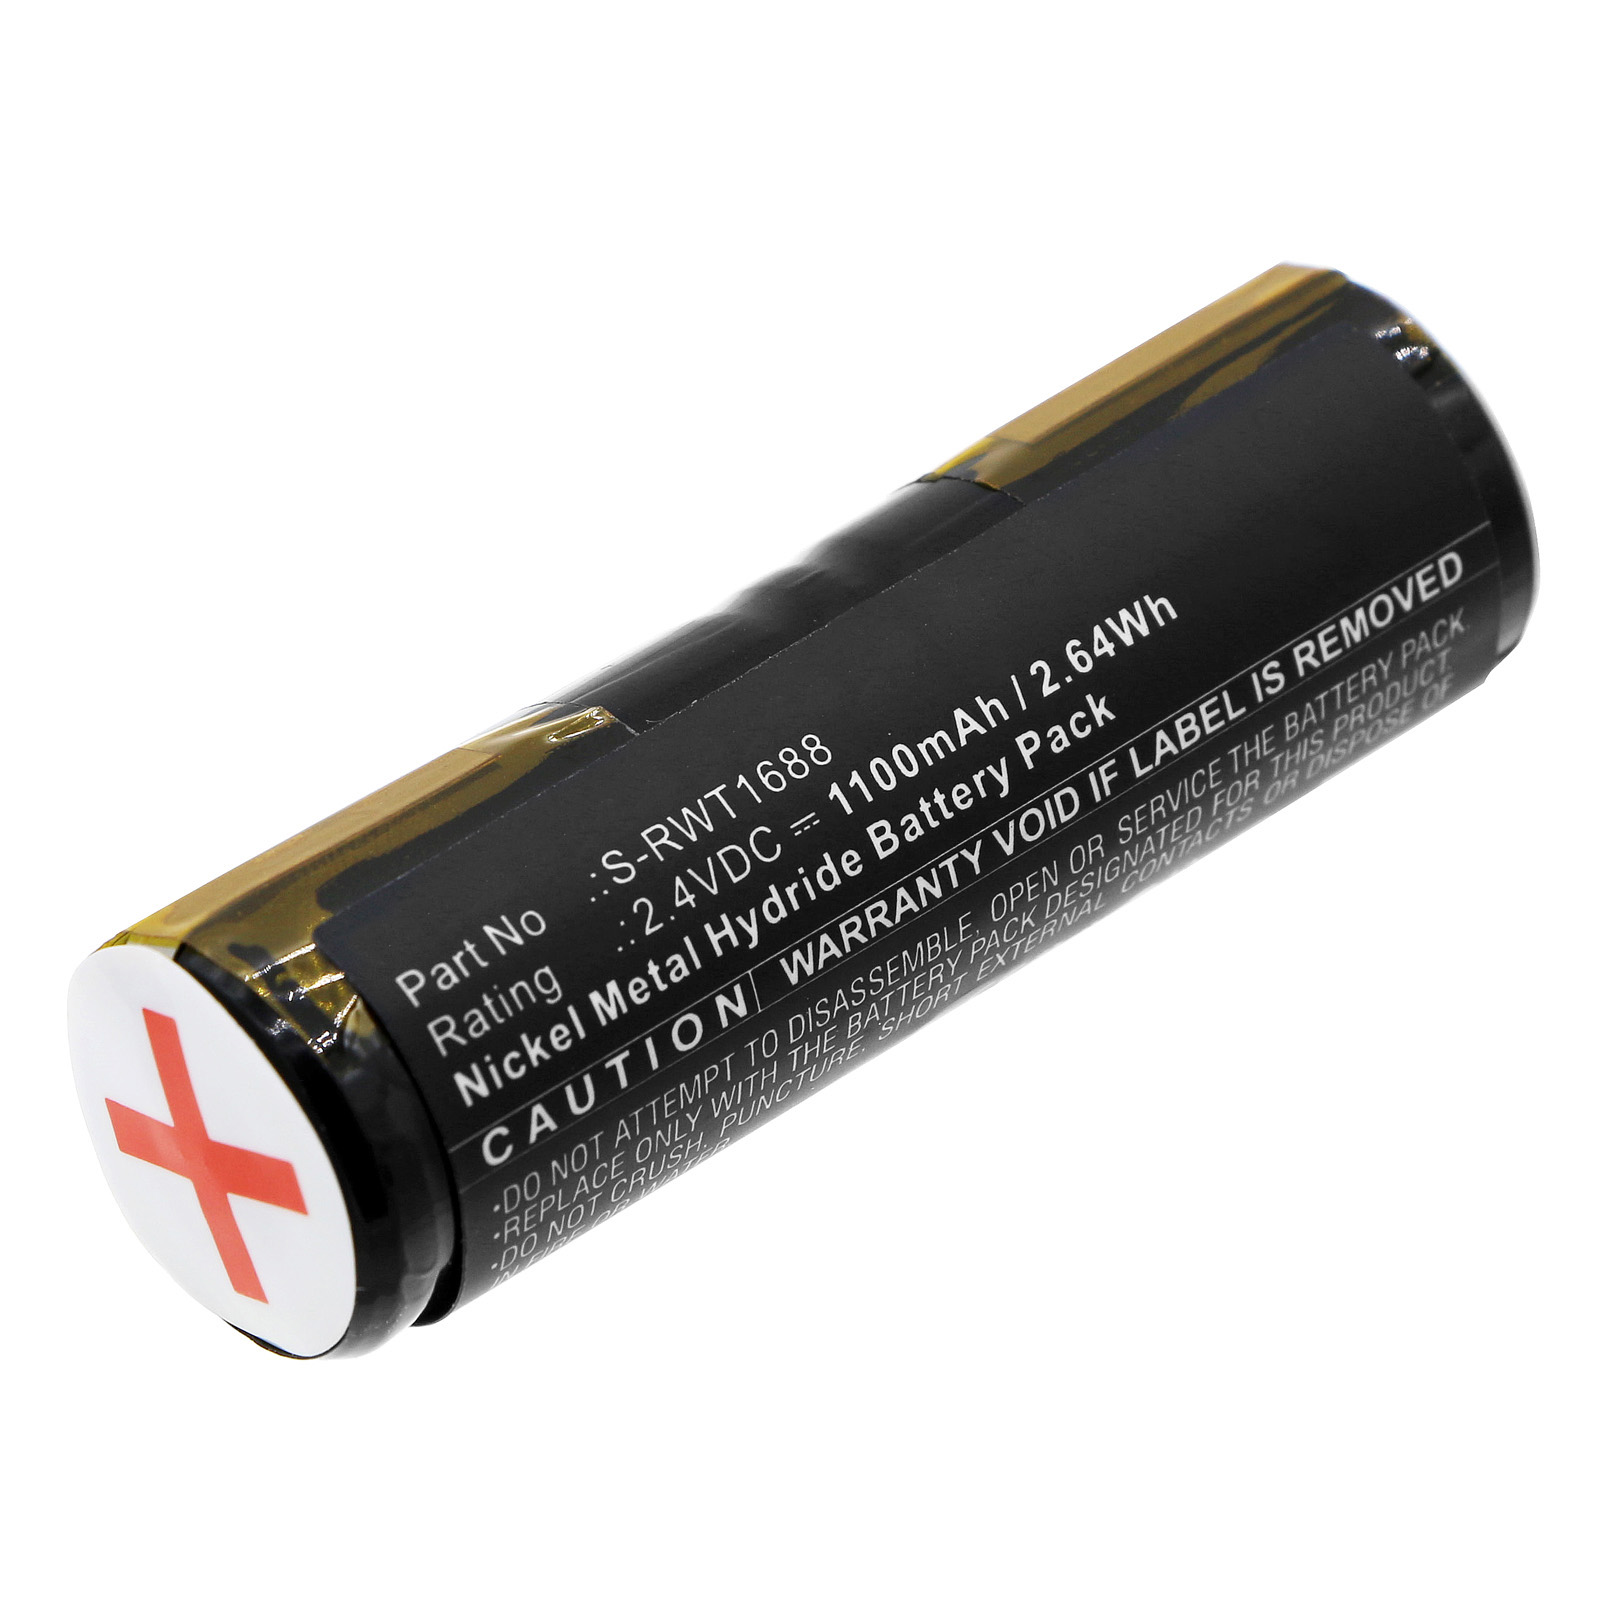 Synergy Digital Shaver Battery, Compatible with Braun RS-MH 3941 Shaver Battery (Ni-MH, 2.4V, 1100mAh)